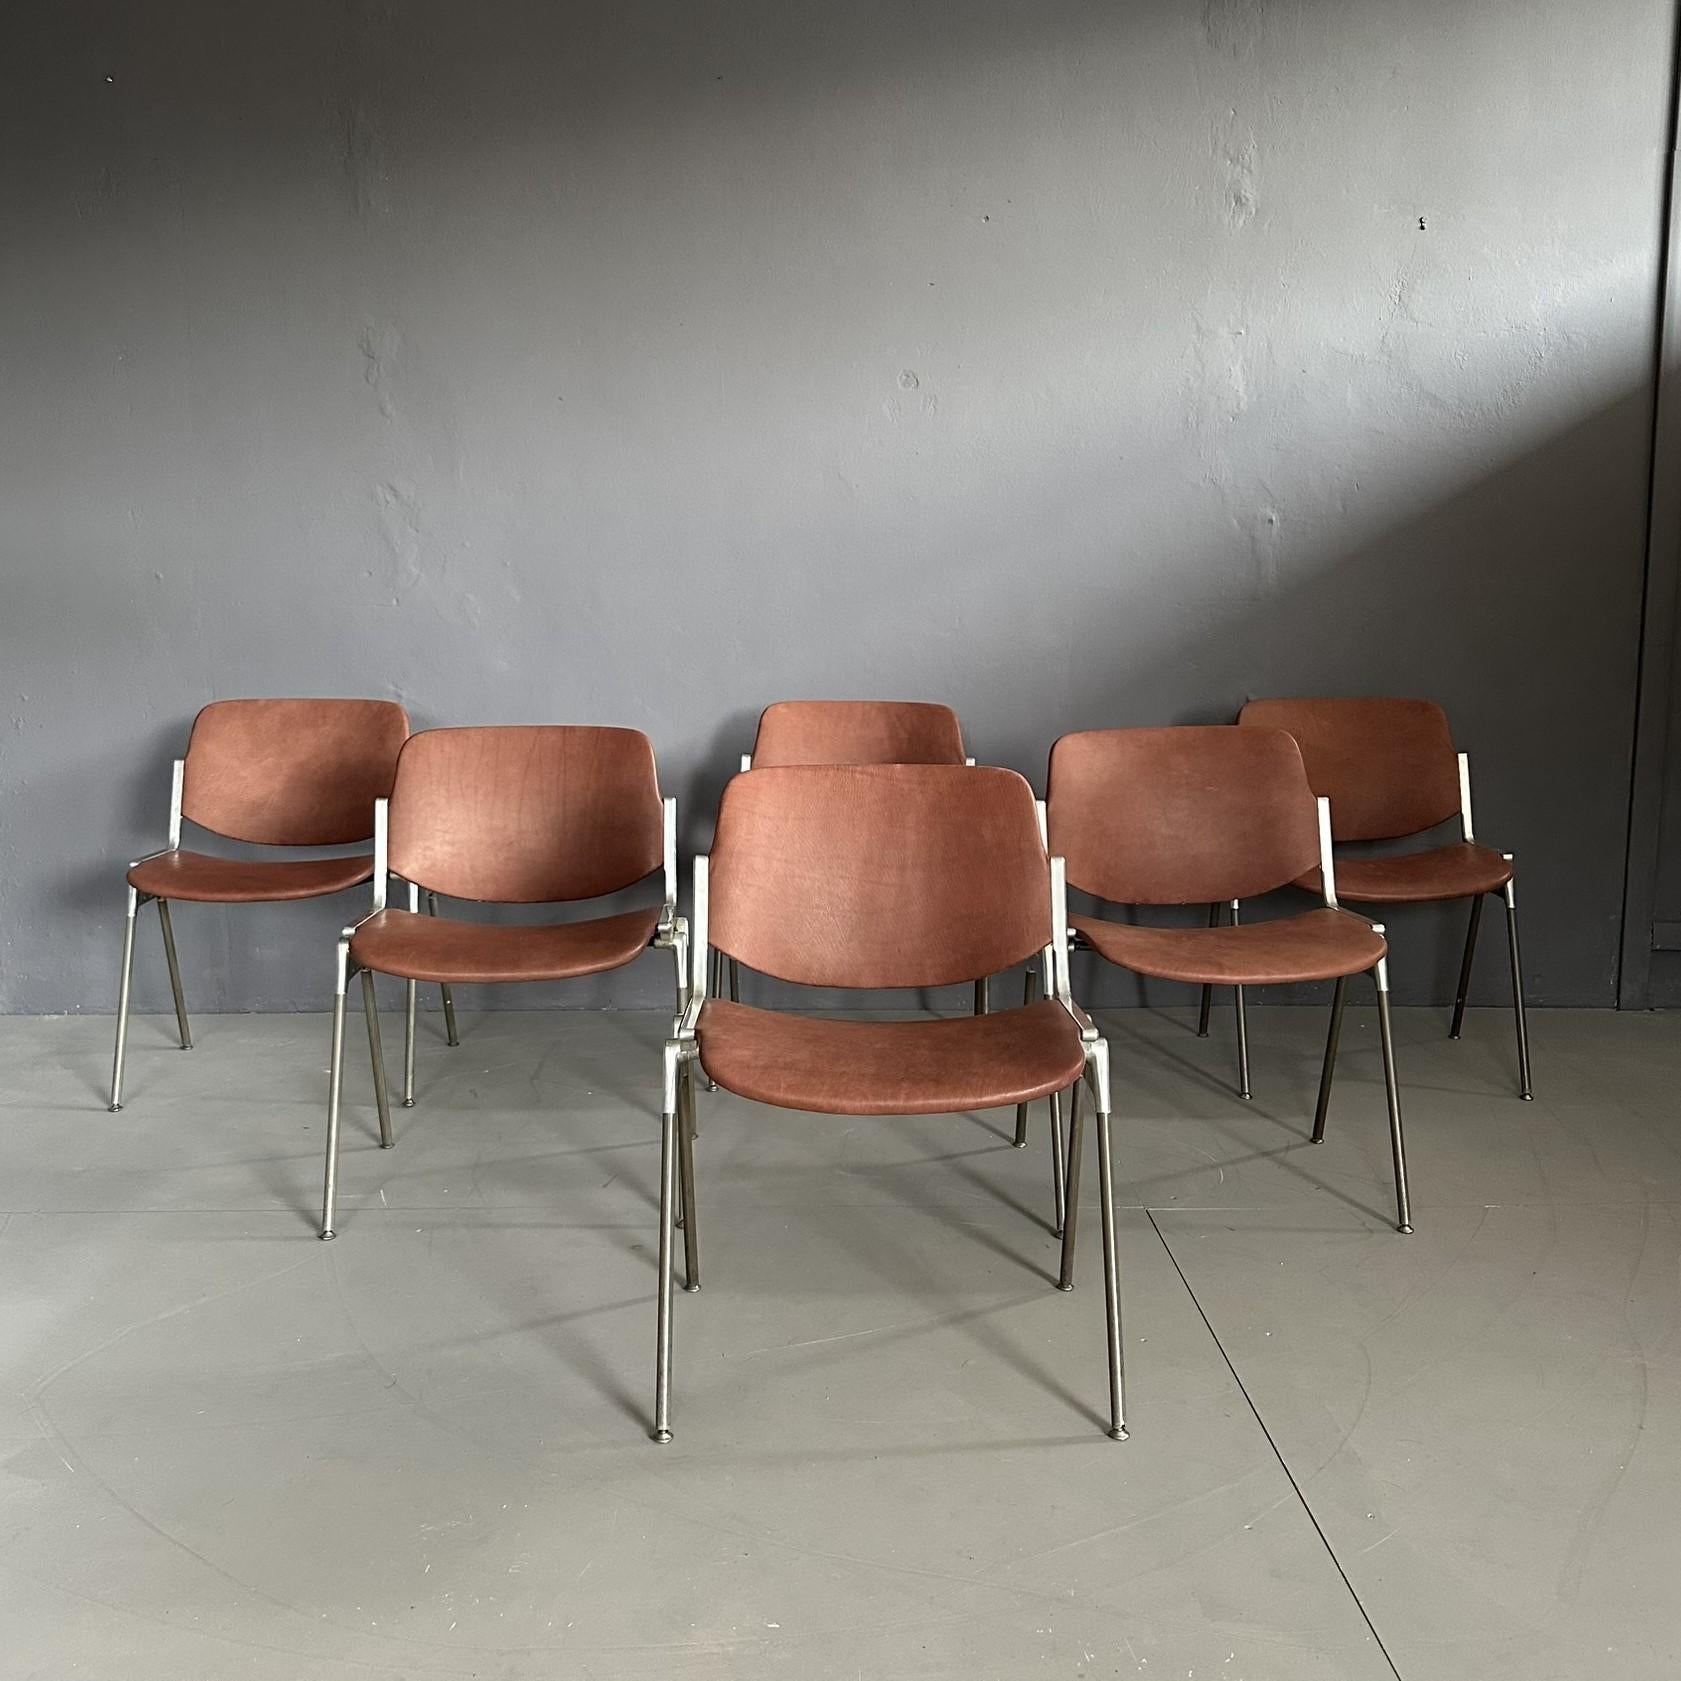 Set of 6 vintage DSC 106 chairs from 1970 by Giancarlo Piretti for Anonima Castelli.
Aluminum frame, brown leather covering.
The trademark is present on the structure.
The DSC 106 chair is an iconic piece produced by Anonima Castelli designed in